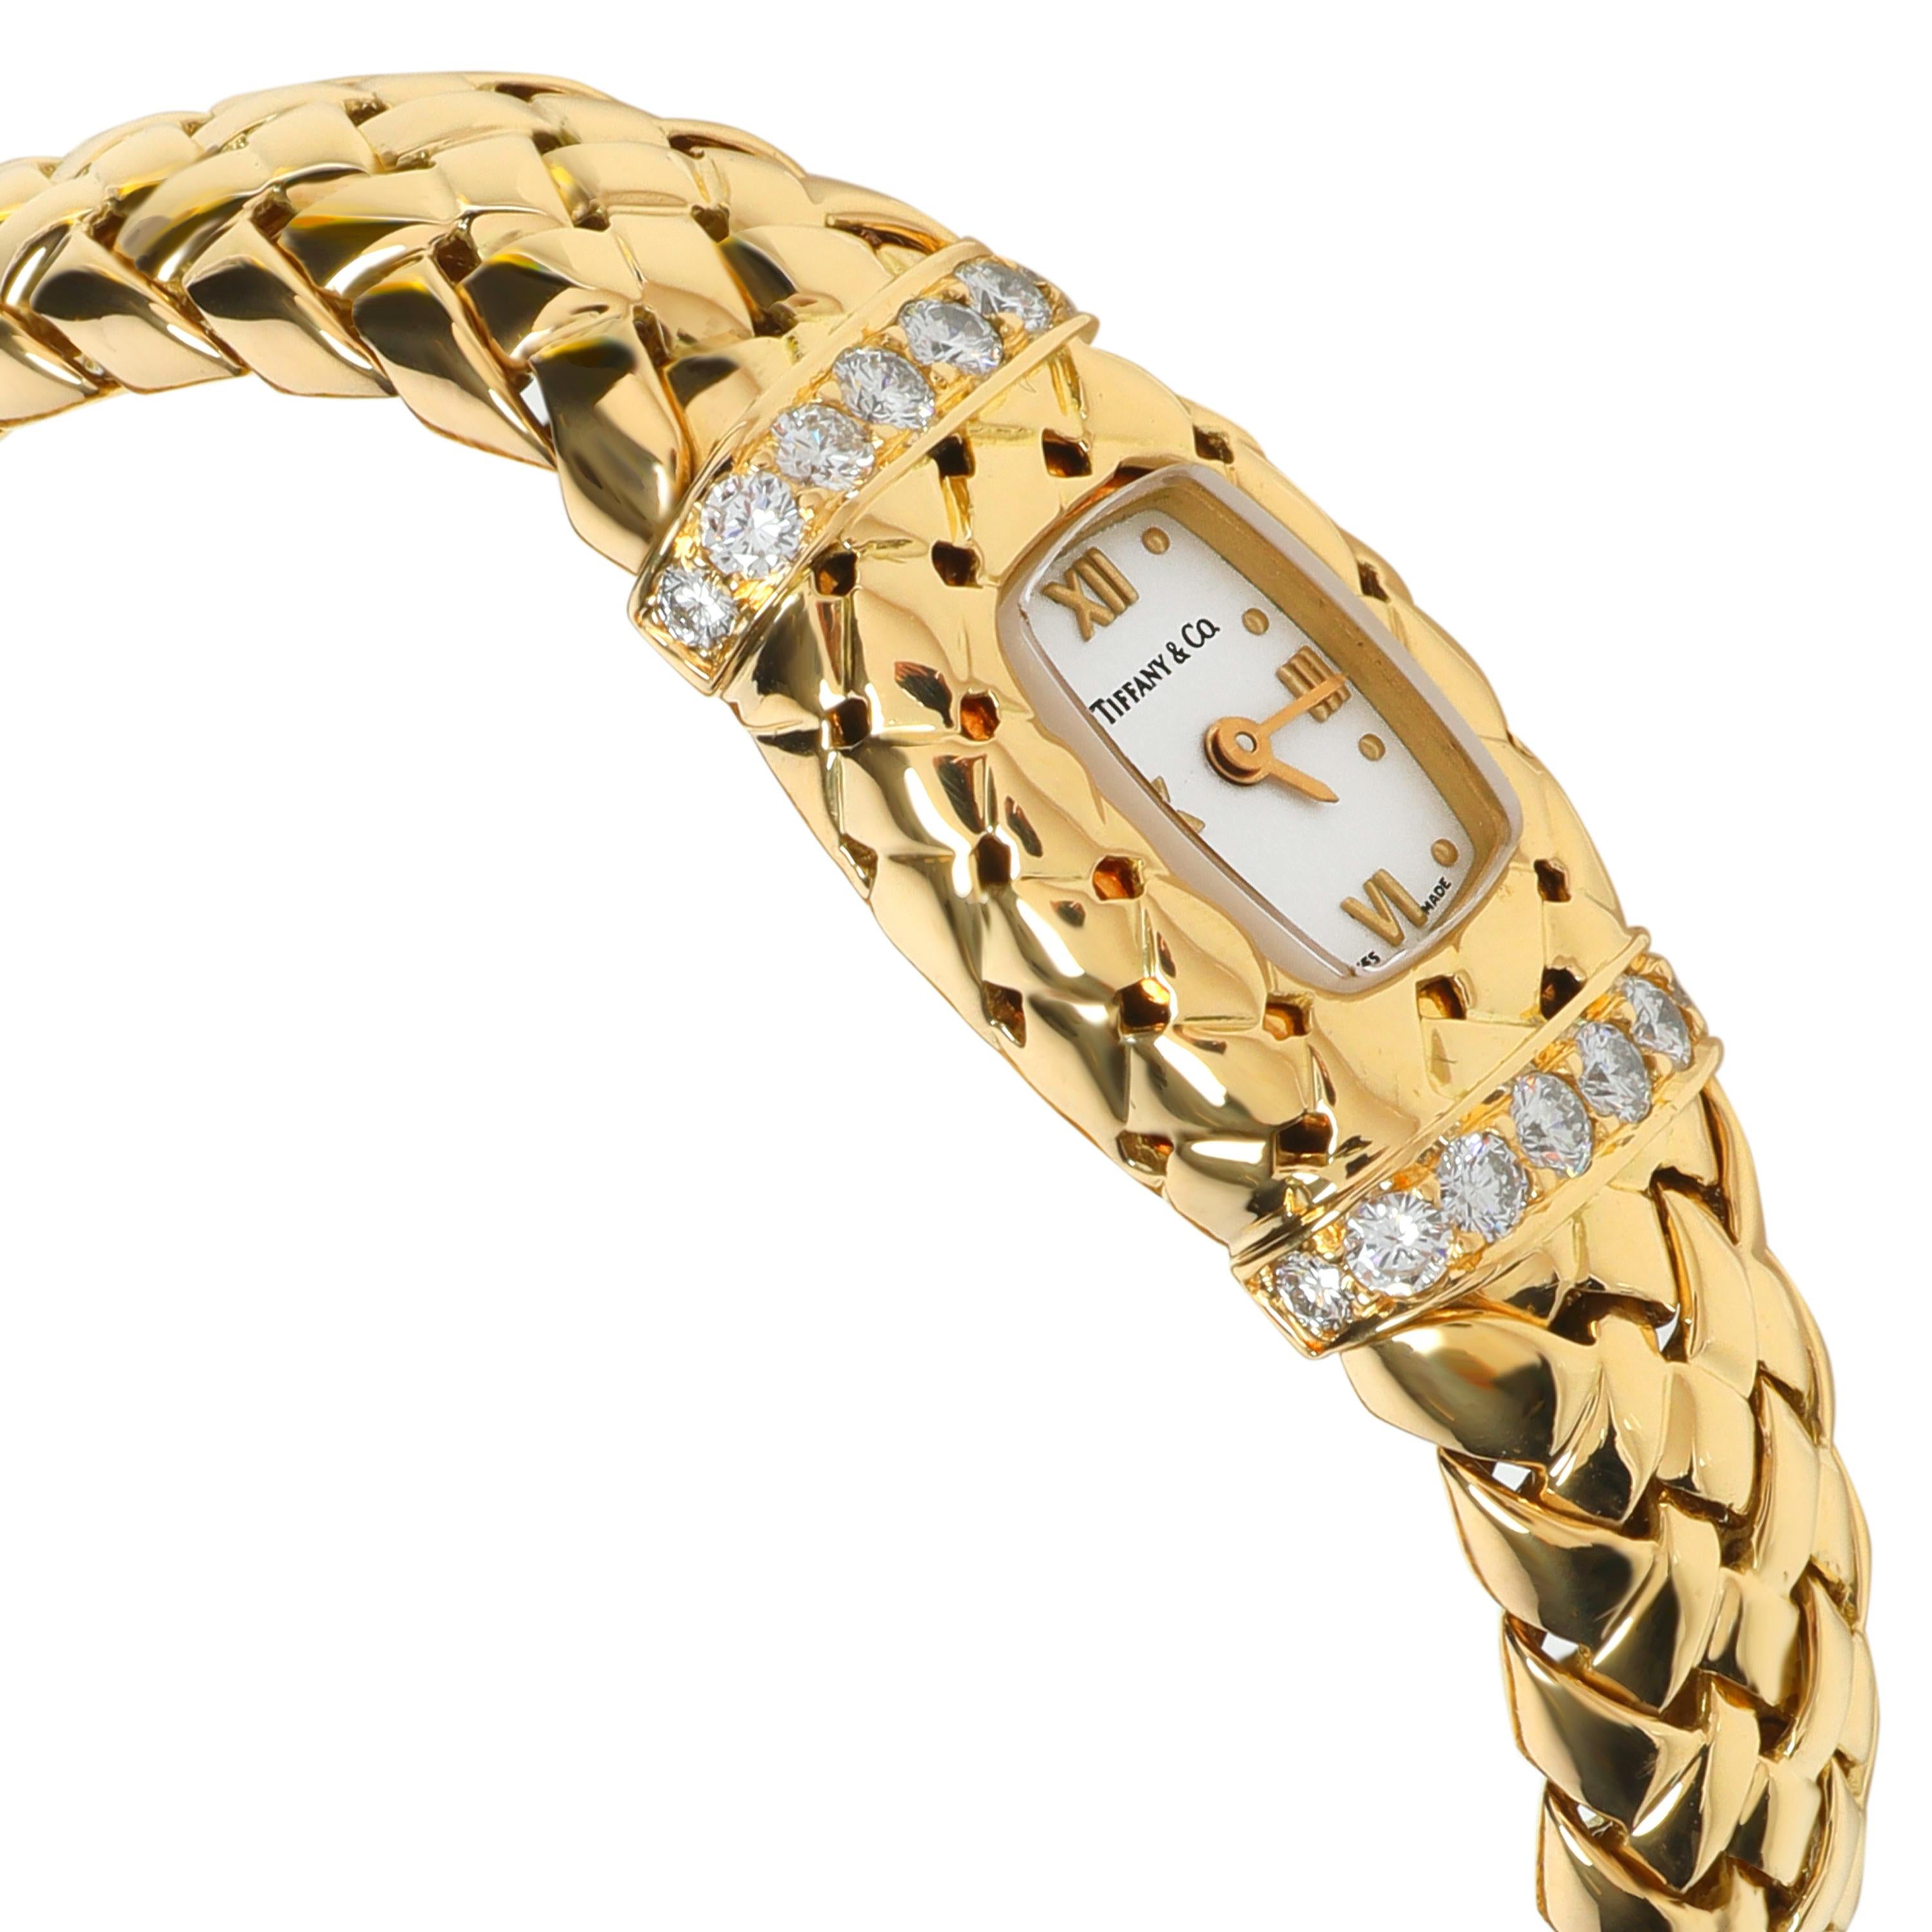 

Tiffany & Co. Vannerie Vannerie Women's Watch in 18kt Yellow Gold

SKU: 106778

PRIMARY DETAILS
Brand:  Tiffany & Co.
Model: Vannerie
Country of Origin: Switzerland
Movement Type: Quartz: Battery
Year Manufactured: 
Year of Manufacture: